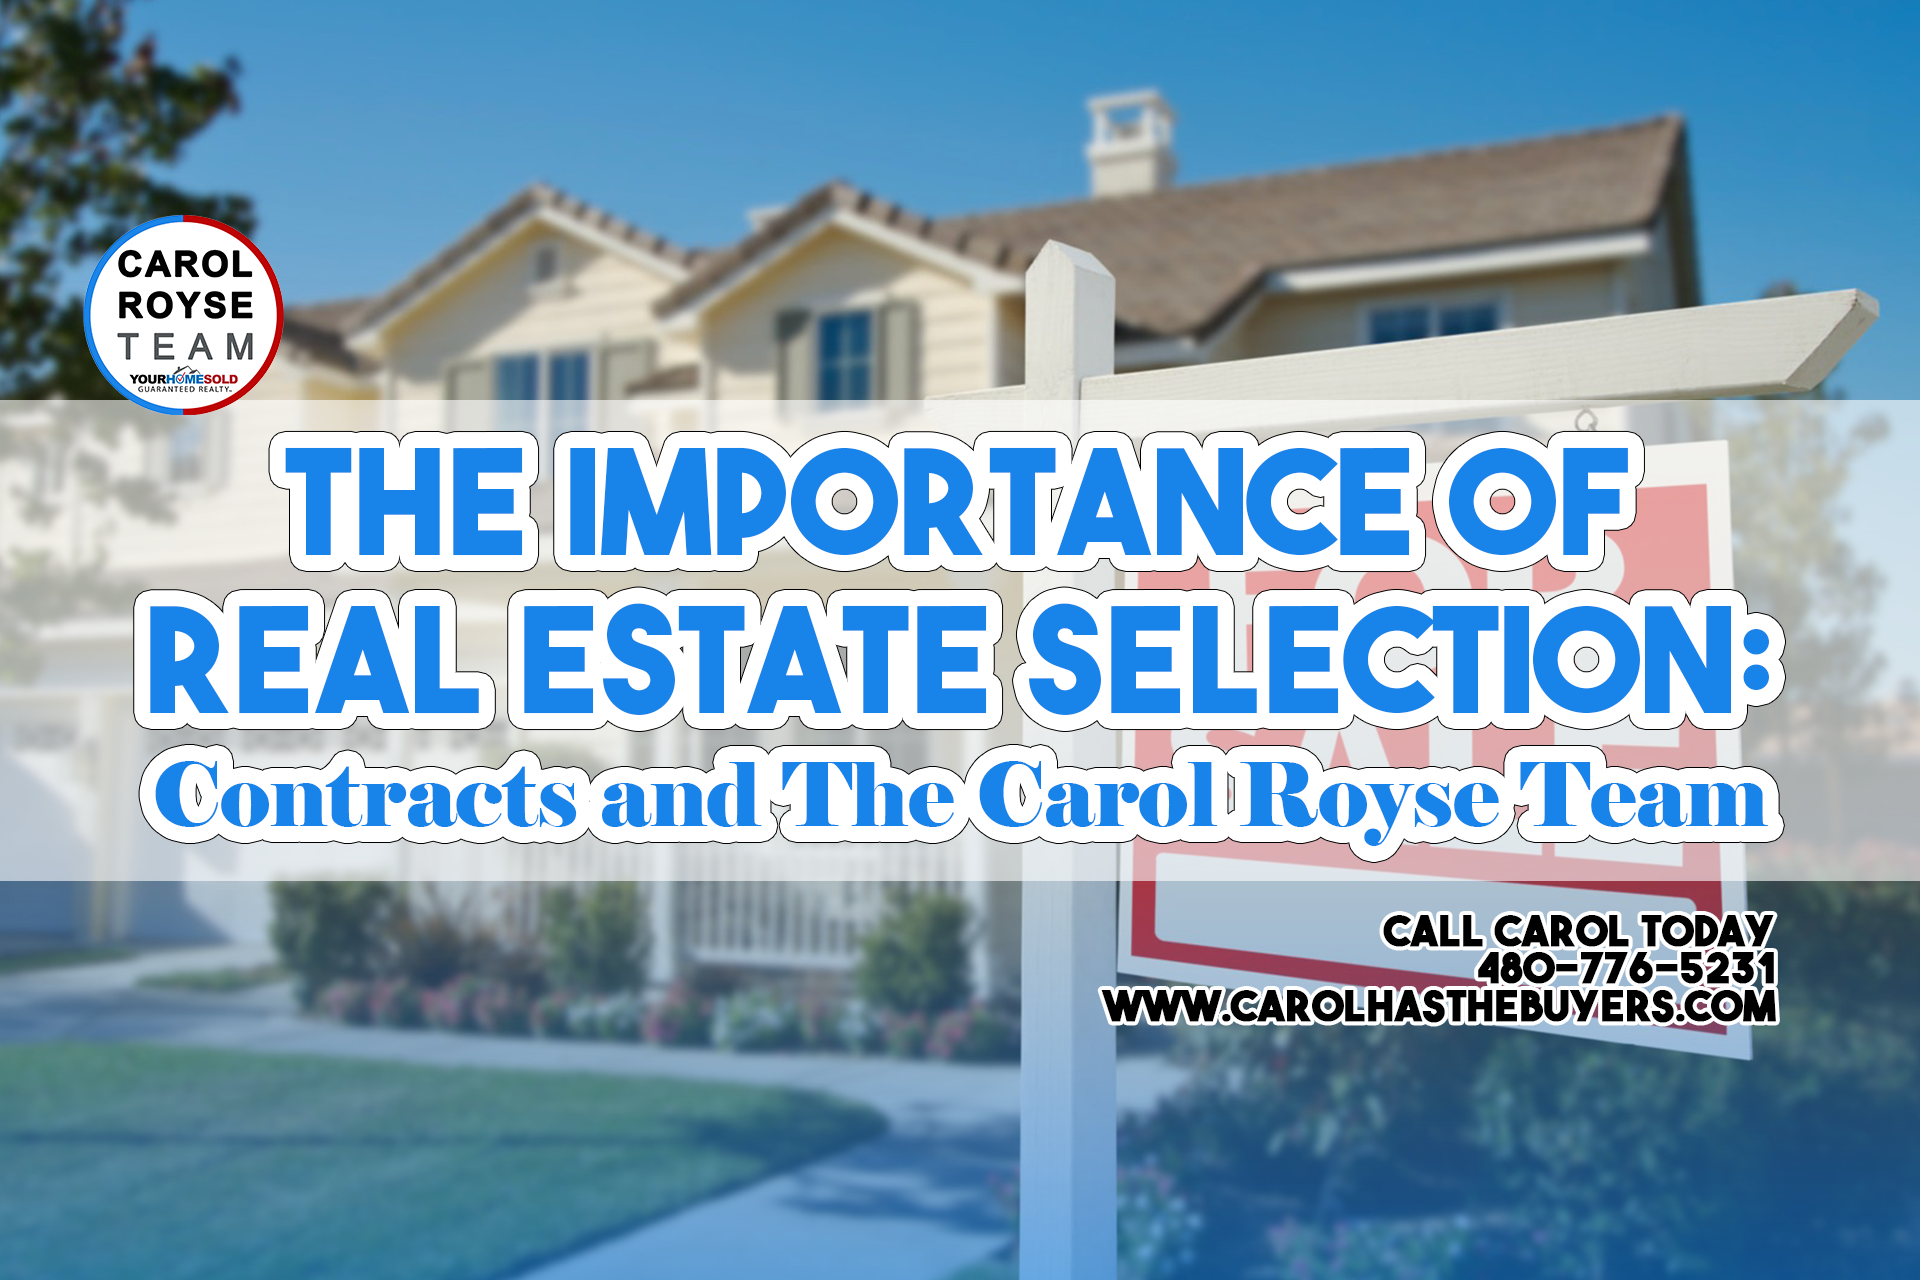 The Importance of Real Estate Selection: Contracts and The Carol Royse Team